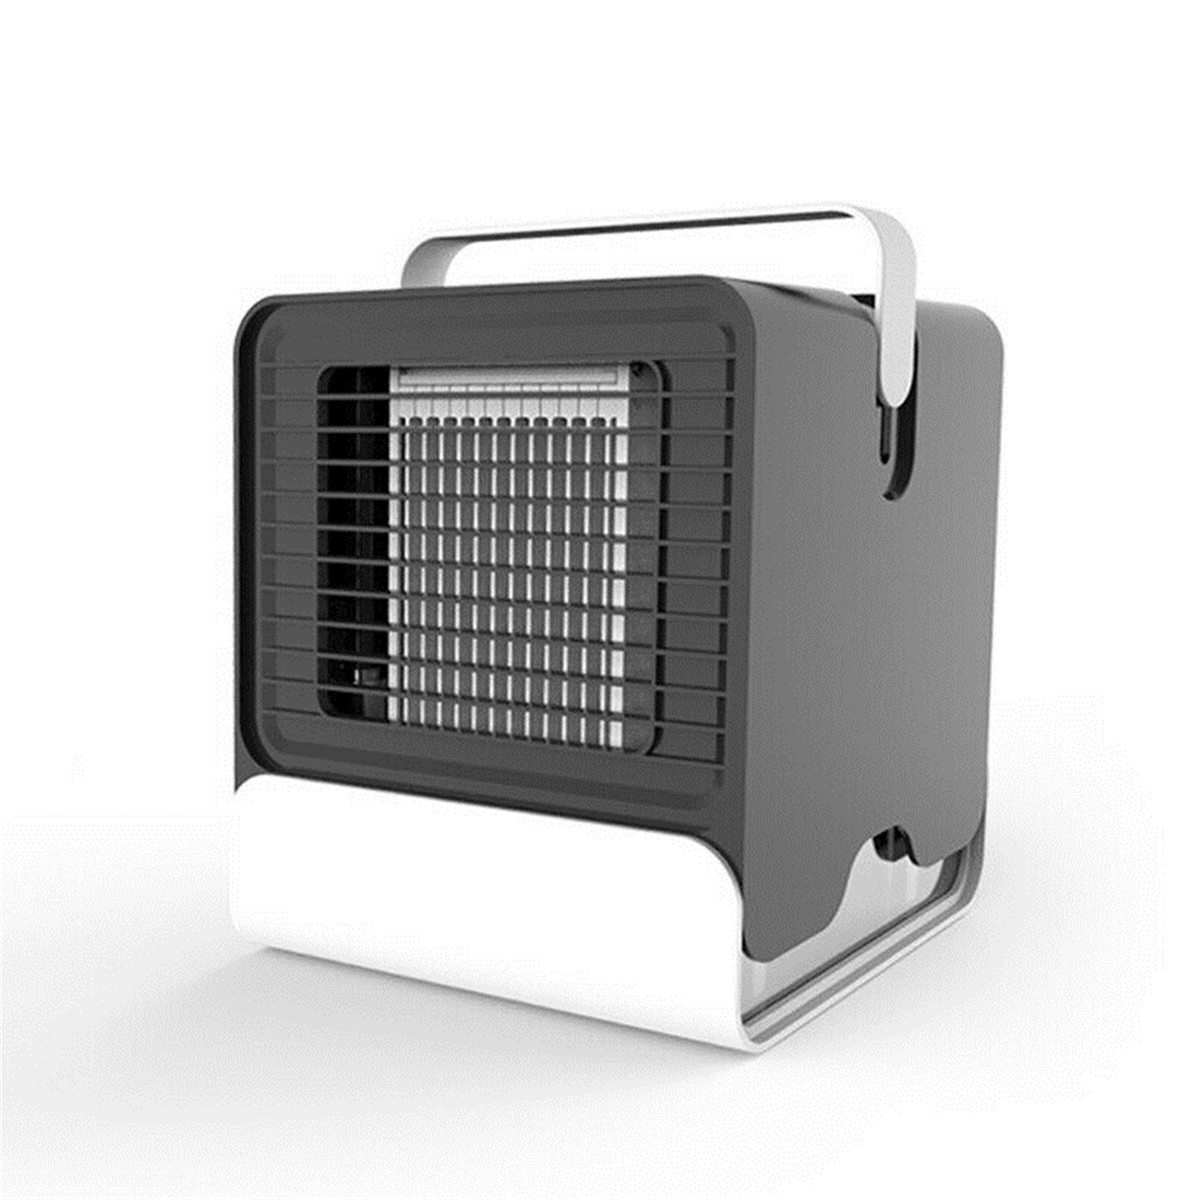 Find Mini Portable Air Conditioner Night Light Conditioning Cooler Humidifier Purifier USB Desktop Air Cooler Fan With Water Tanks for Sale on Gipsybee.com with cryptocurrencies